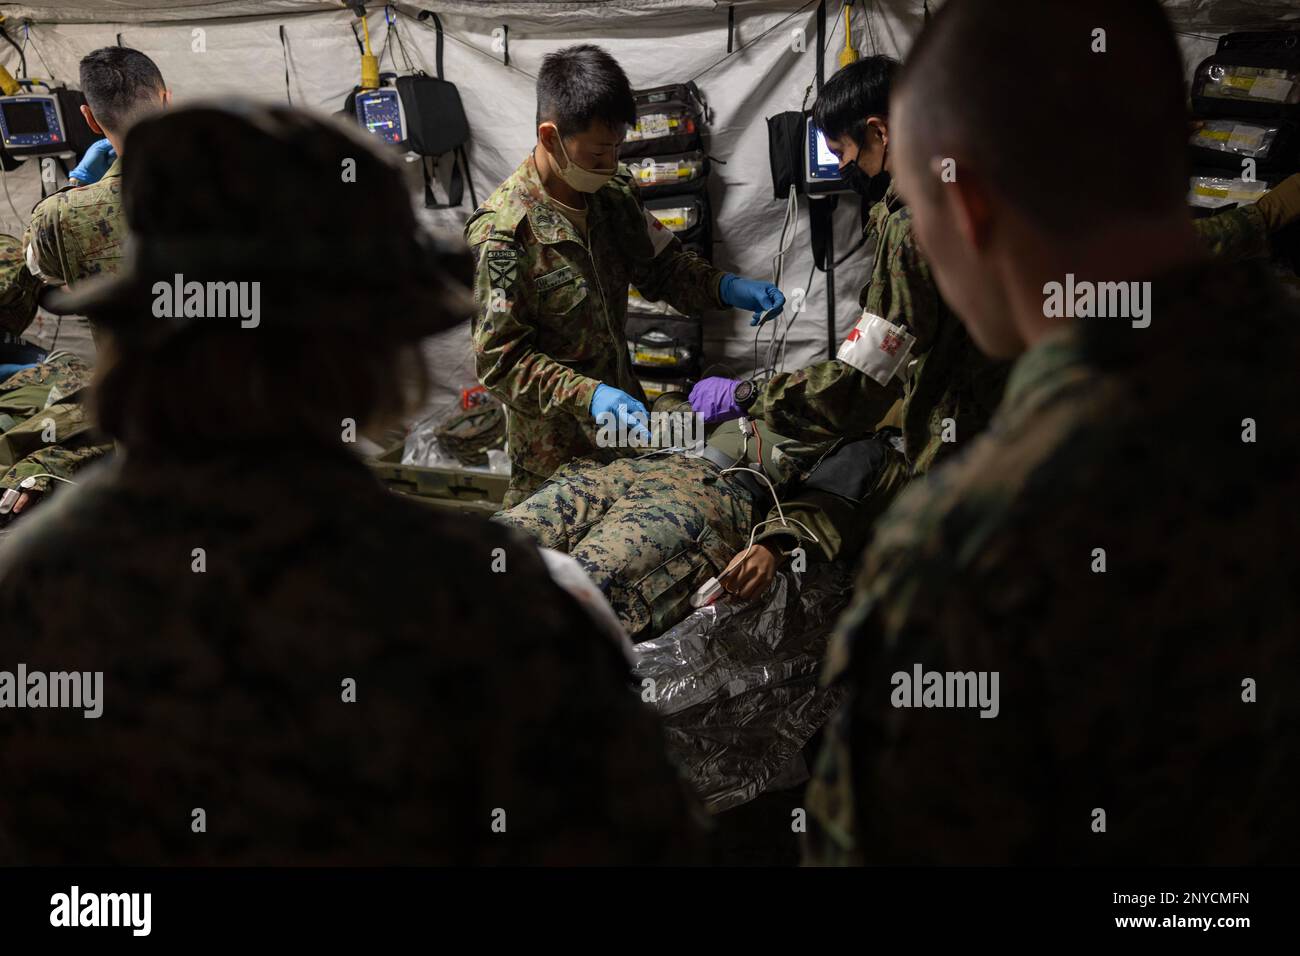 U.S. Navy corpsmen with the 31st Marine Expeditionary Unit, and soldiers with the 1st Amphibious Rapid Deployment Regiment, Japan Ground Self-Defense Force, examine vital signs on a simulated casualty during a mass casualty exercise at Hijudai, Japan on Feb. 19, 2023. The training simulated a mass casualty event granting the bi-lateral medical team an opportunity to actively practice medical care in the field with closely simulated pressure and conditions during Iron Fist 23. Iron Fist is an annual bilateral exercise designed to increase interoperability and strengthen the relationships betwee Stock Photo